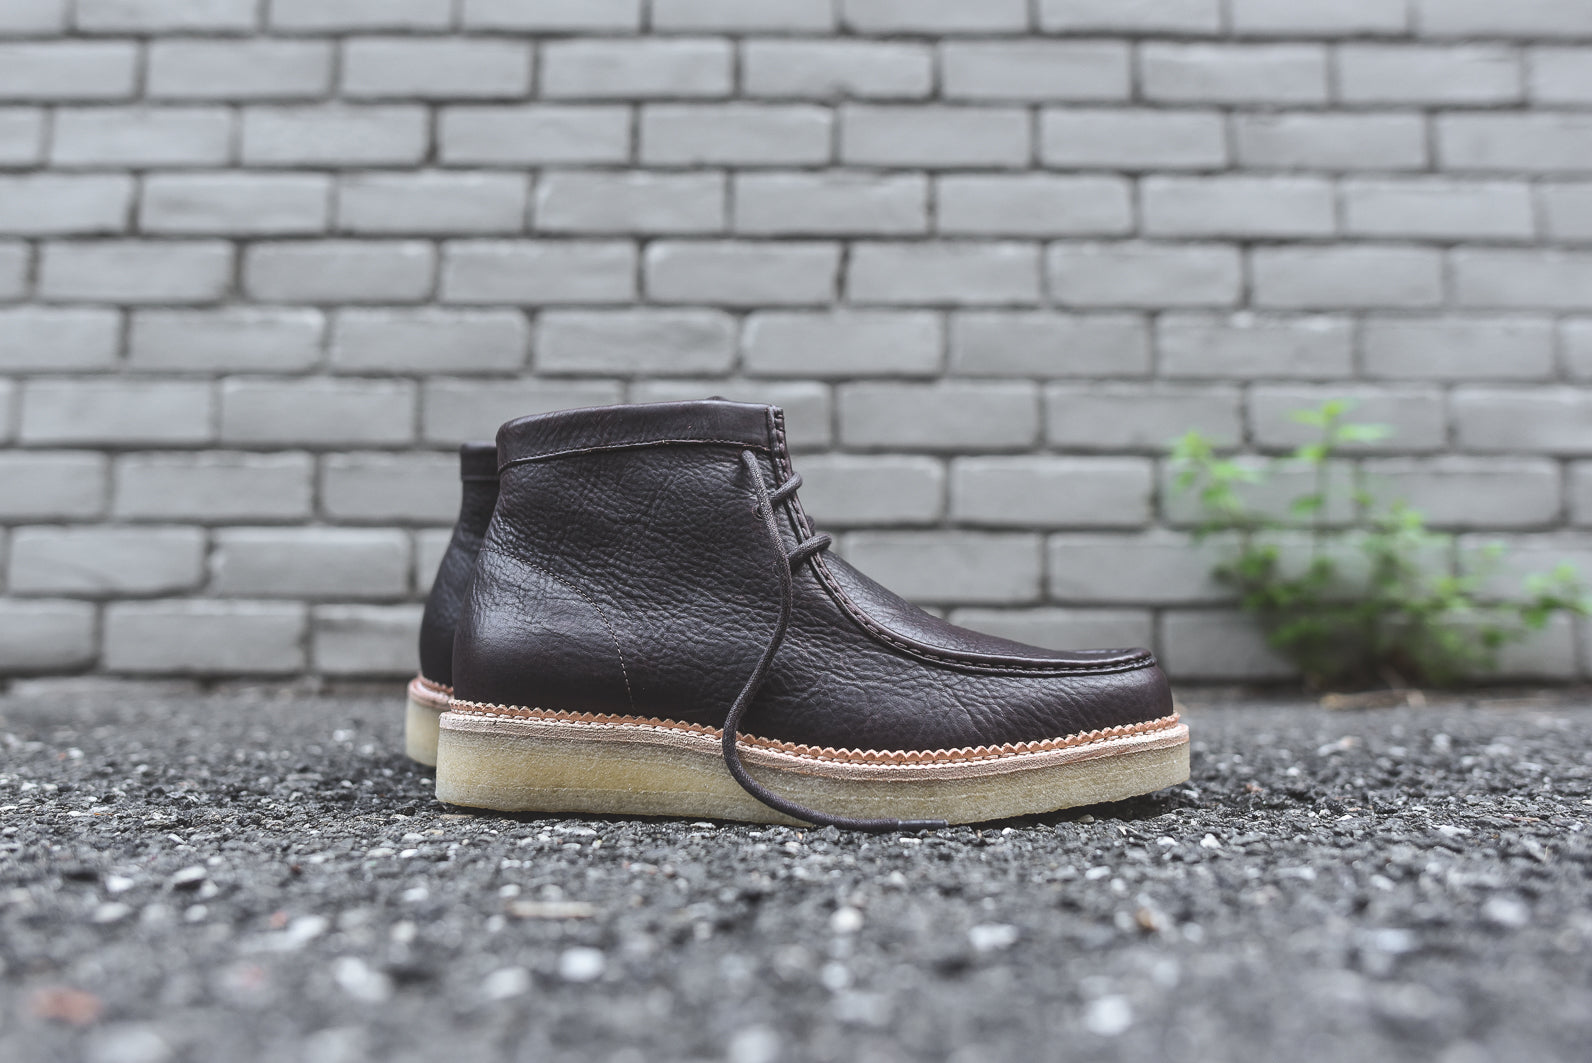 clarks winter shoes 2015